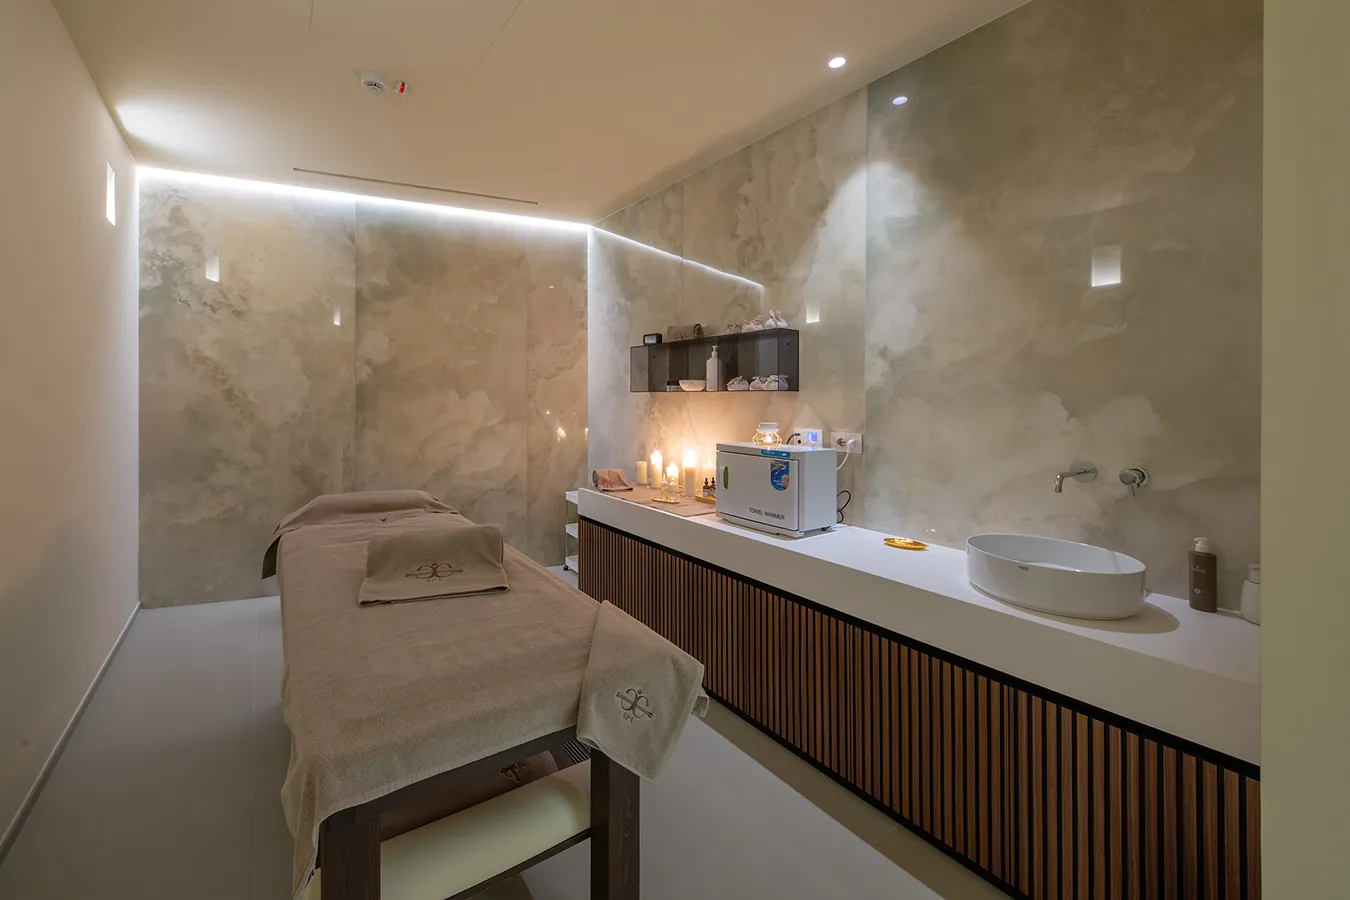 Refined SPA treatment room with onyx marble effect porcelain stoneware, soft lighting, and meticulous details for a luxurious wellness experience.